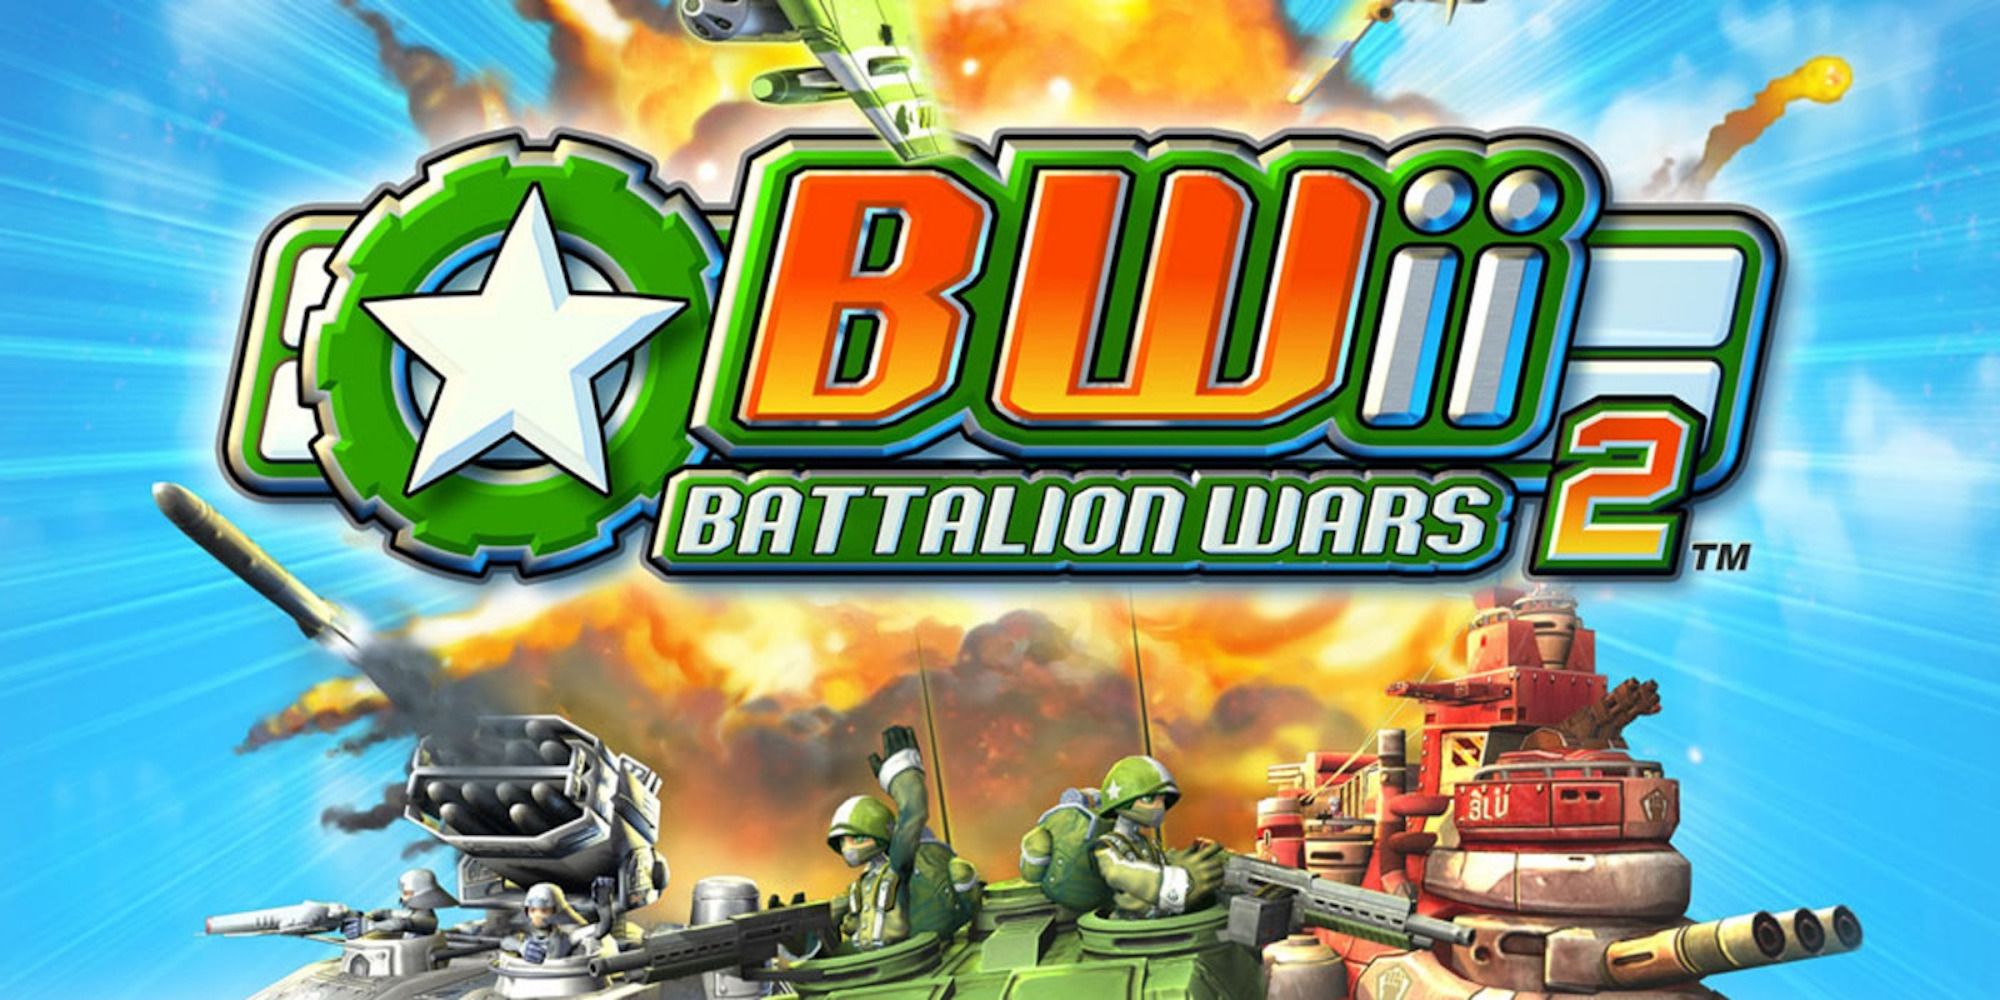 Promo art featuring characters from Battalion Wars 2